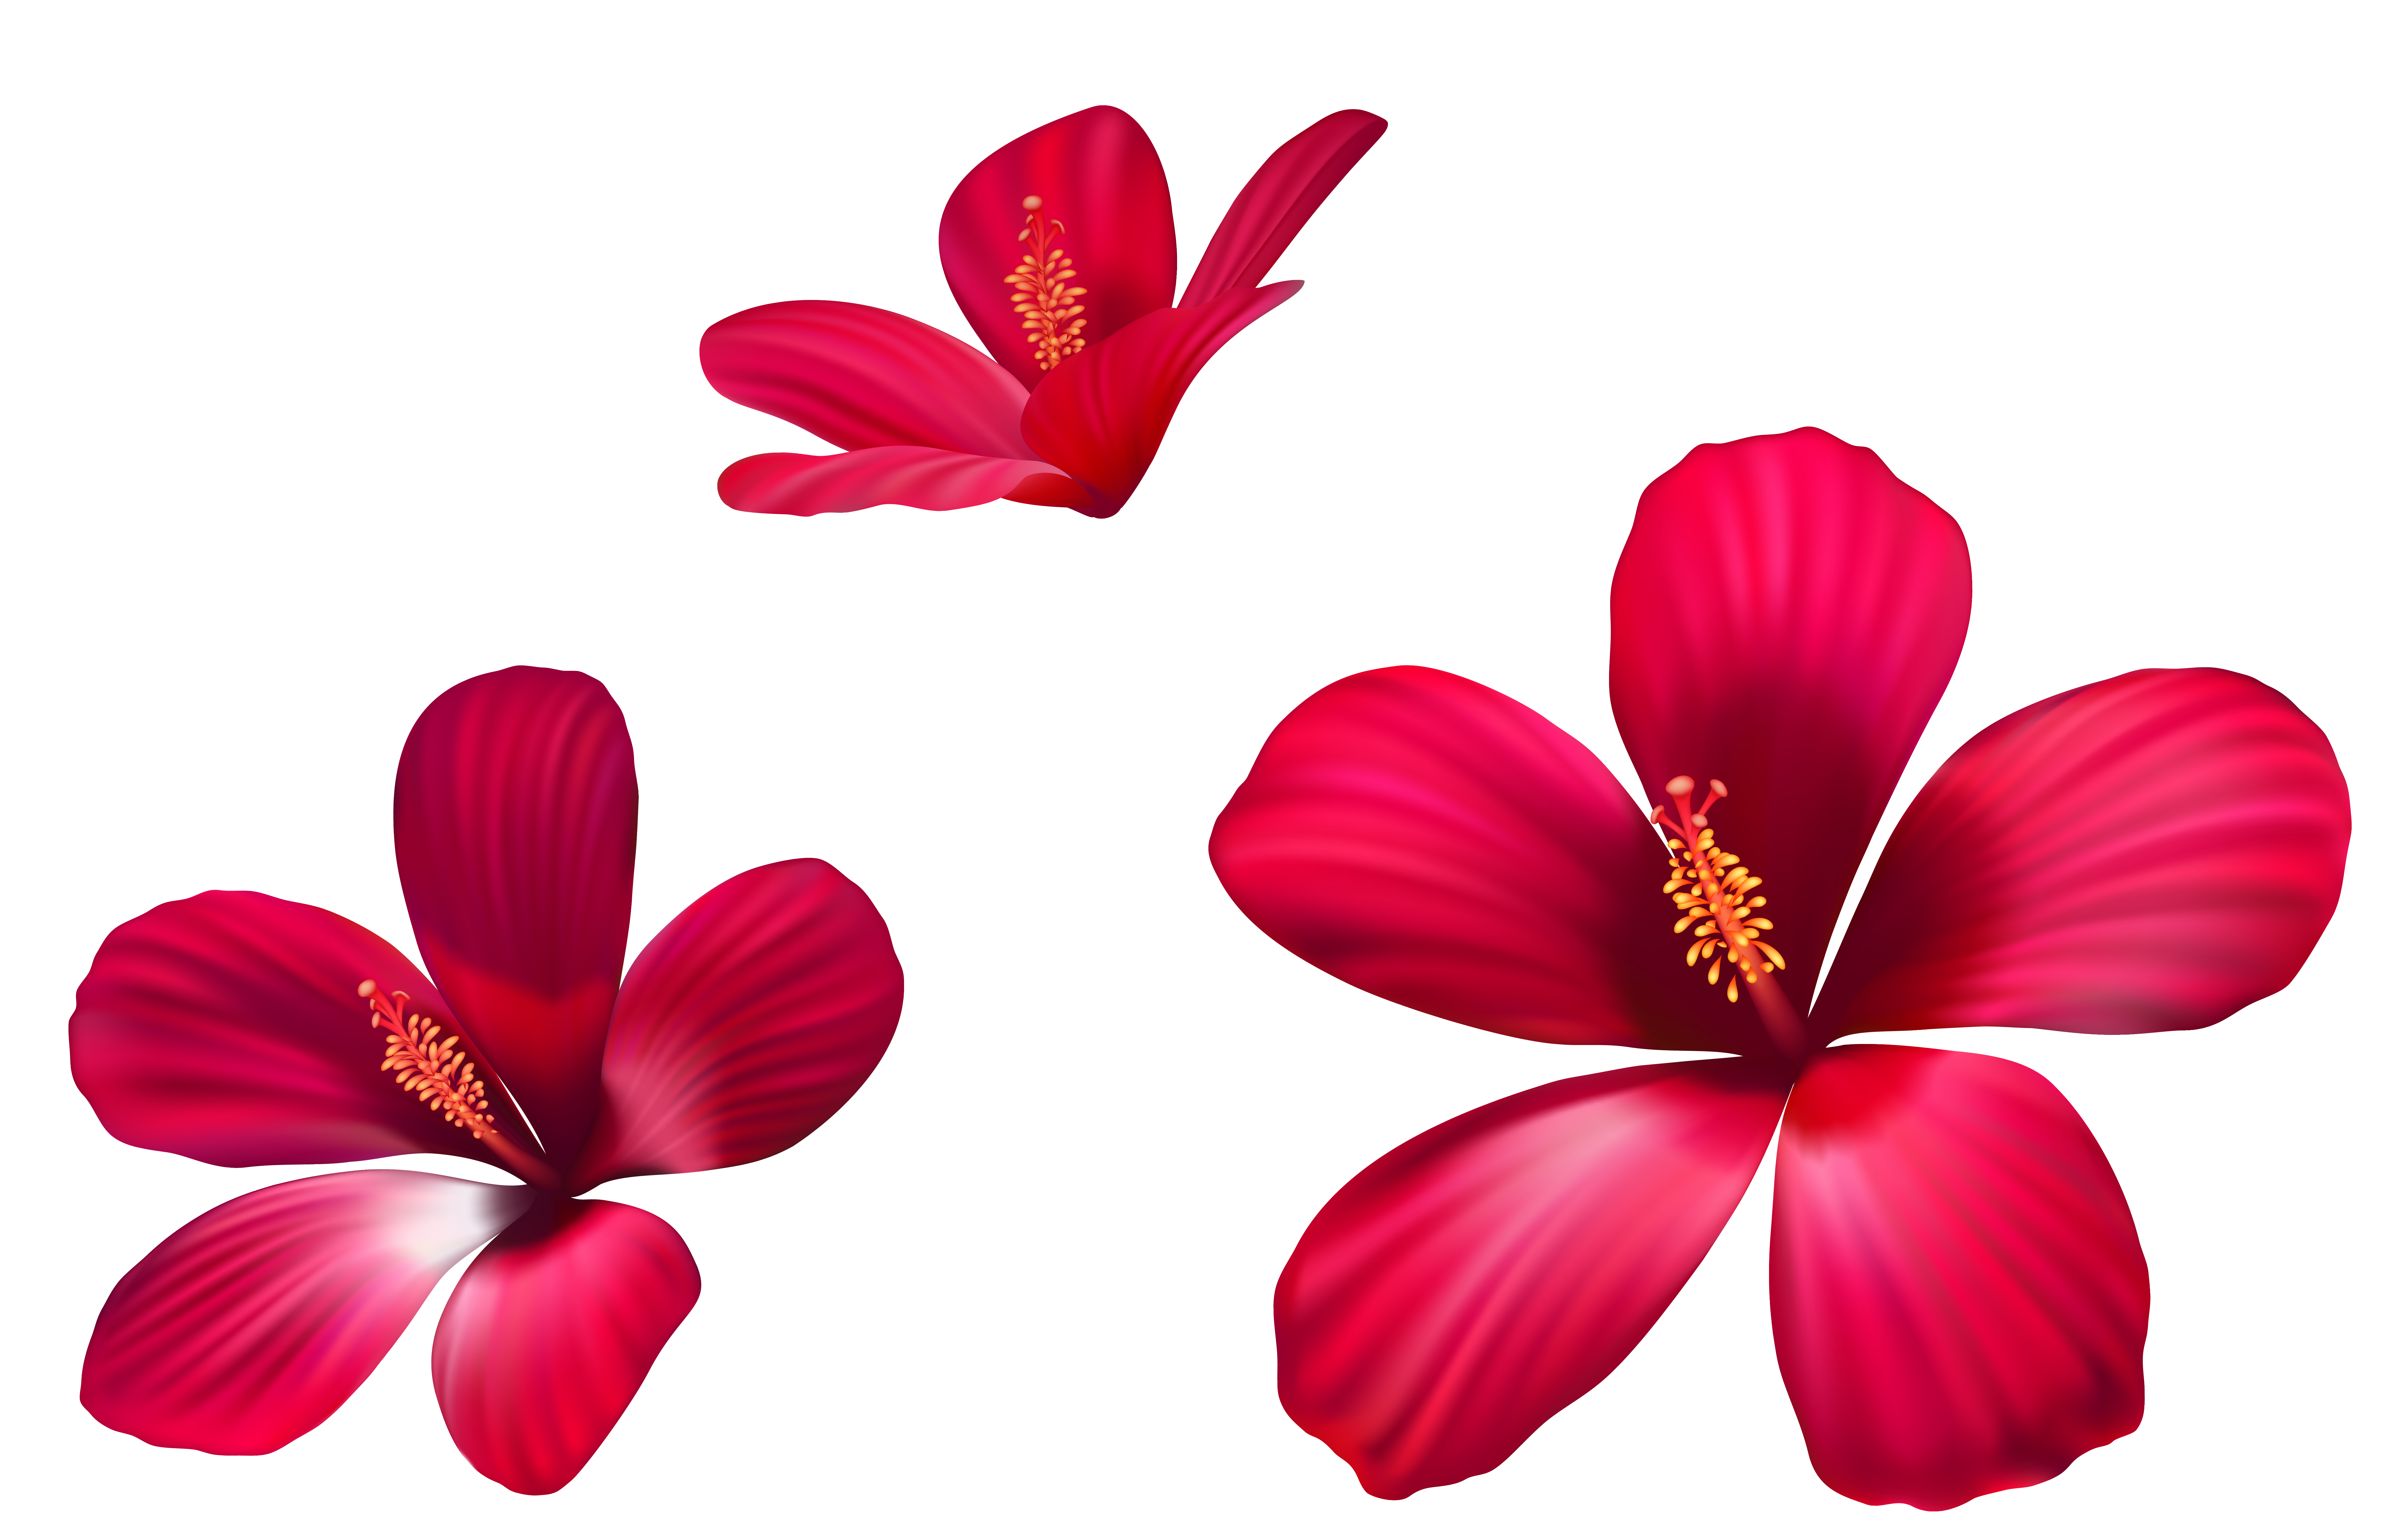 Exotic Pink Flowers Png Clipart Image Gallery Yopriceville High Quality Images And Transparent Png Free Clipart